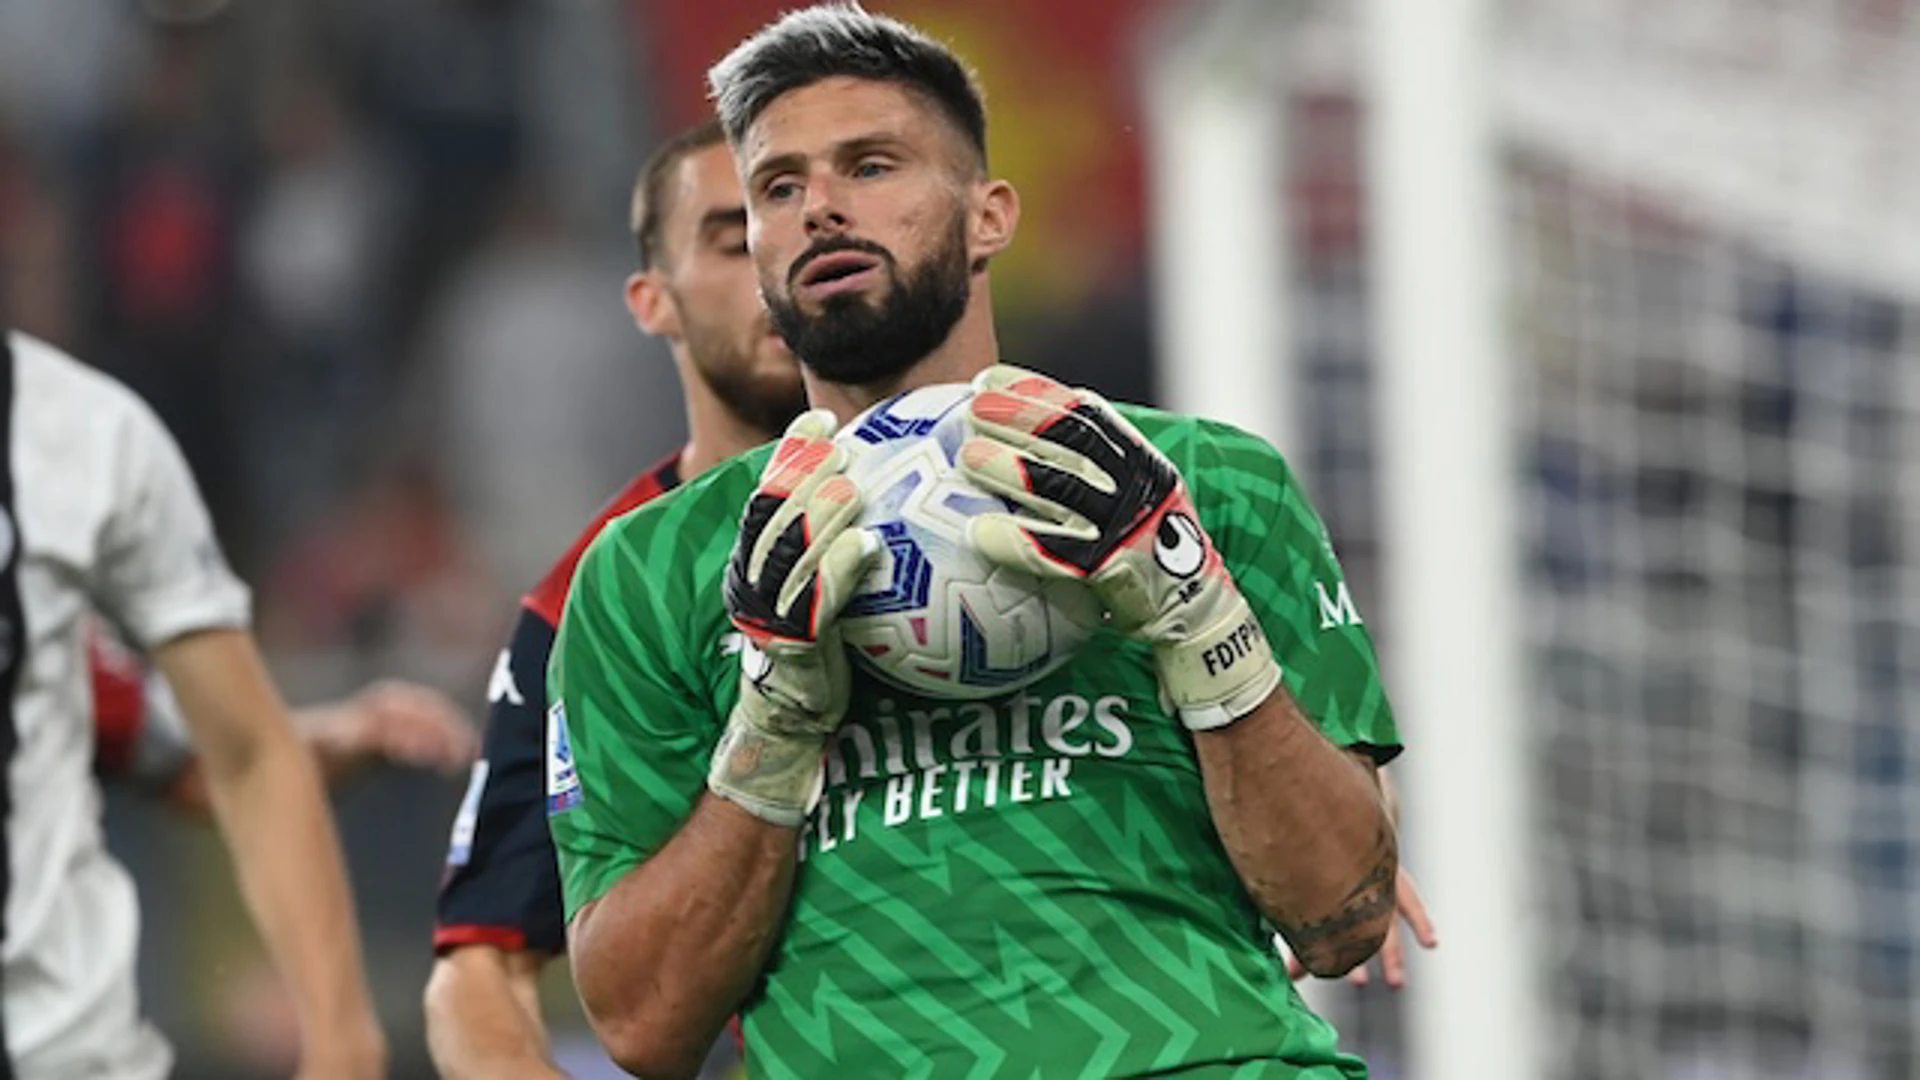 Olivier Giroud takes over as goalkeeper after Mike Maignan's red card